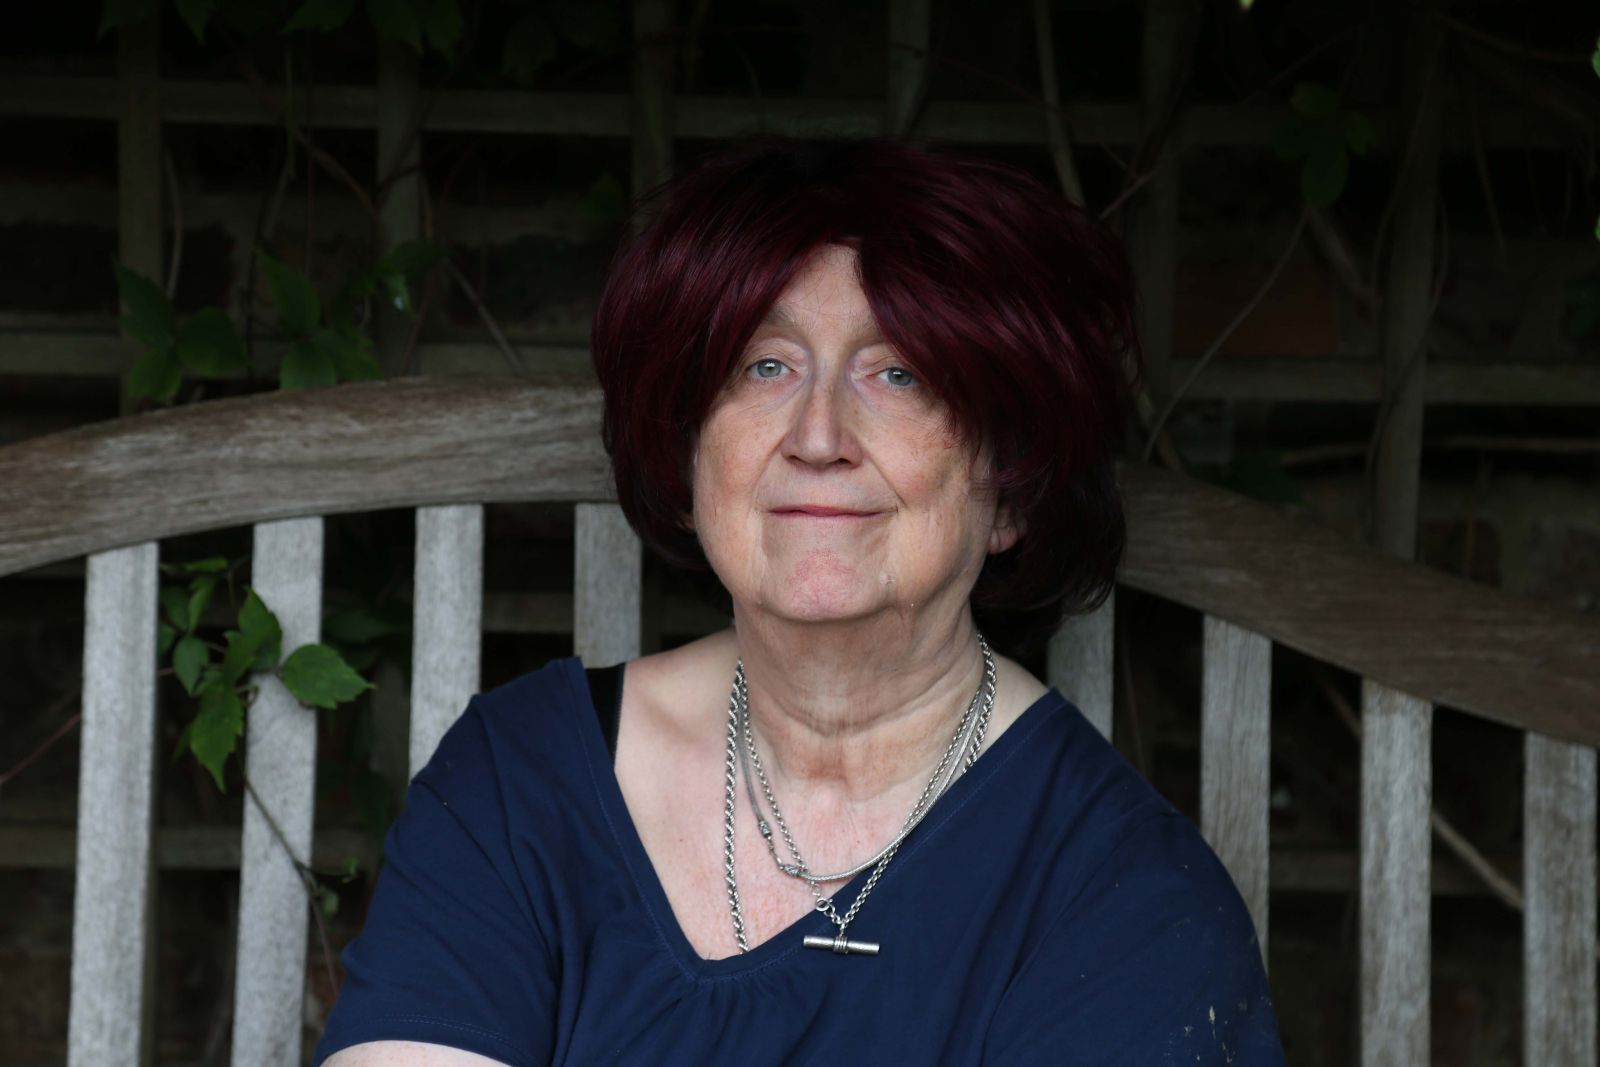 portrait photograph of Roz looking at camera, wearing v-necked blue top.